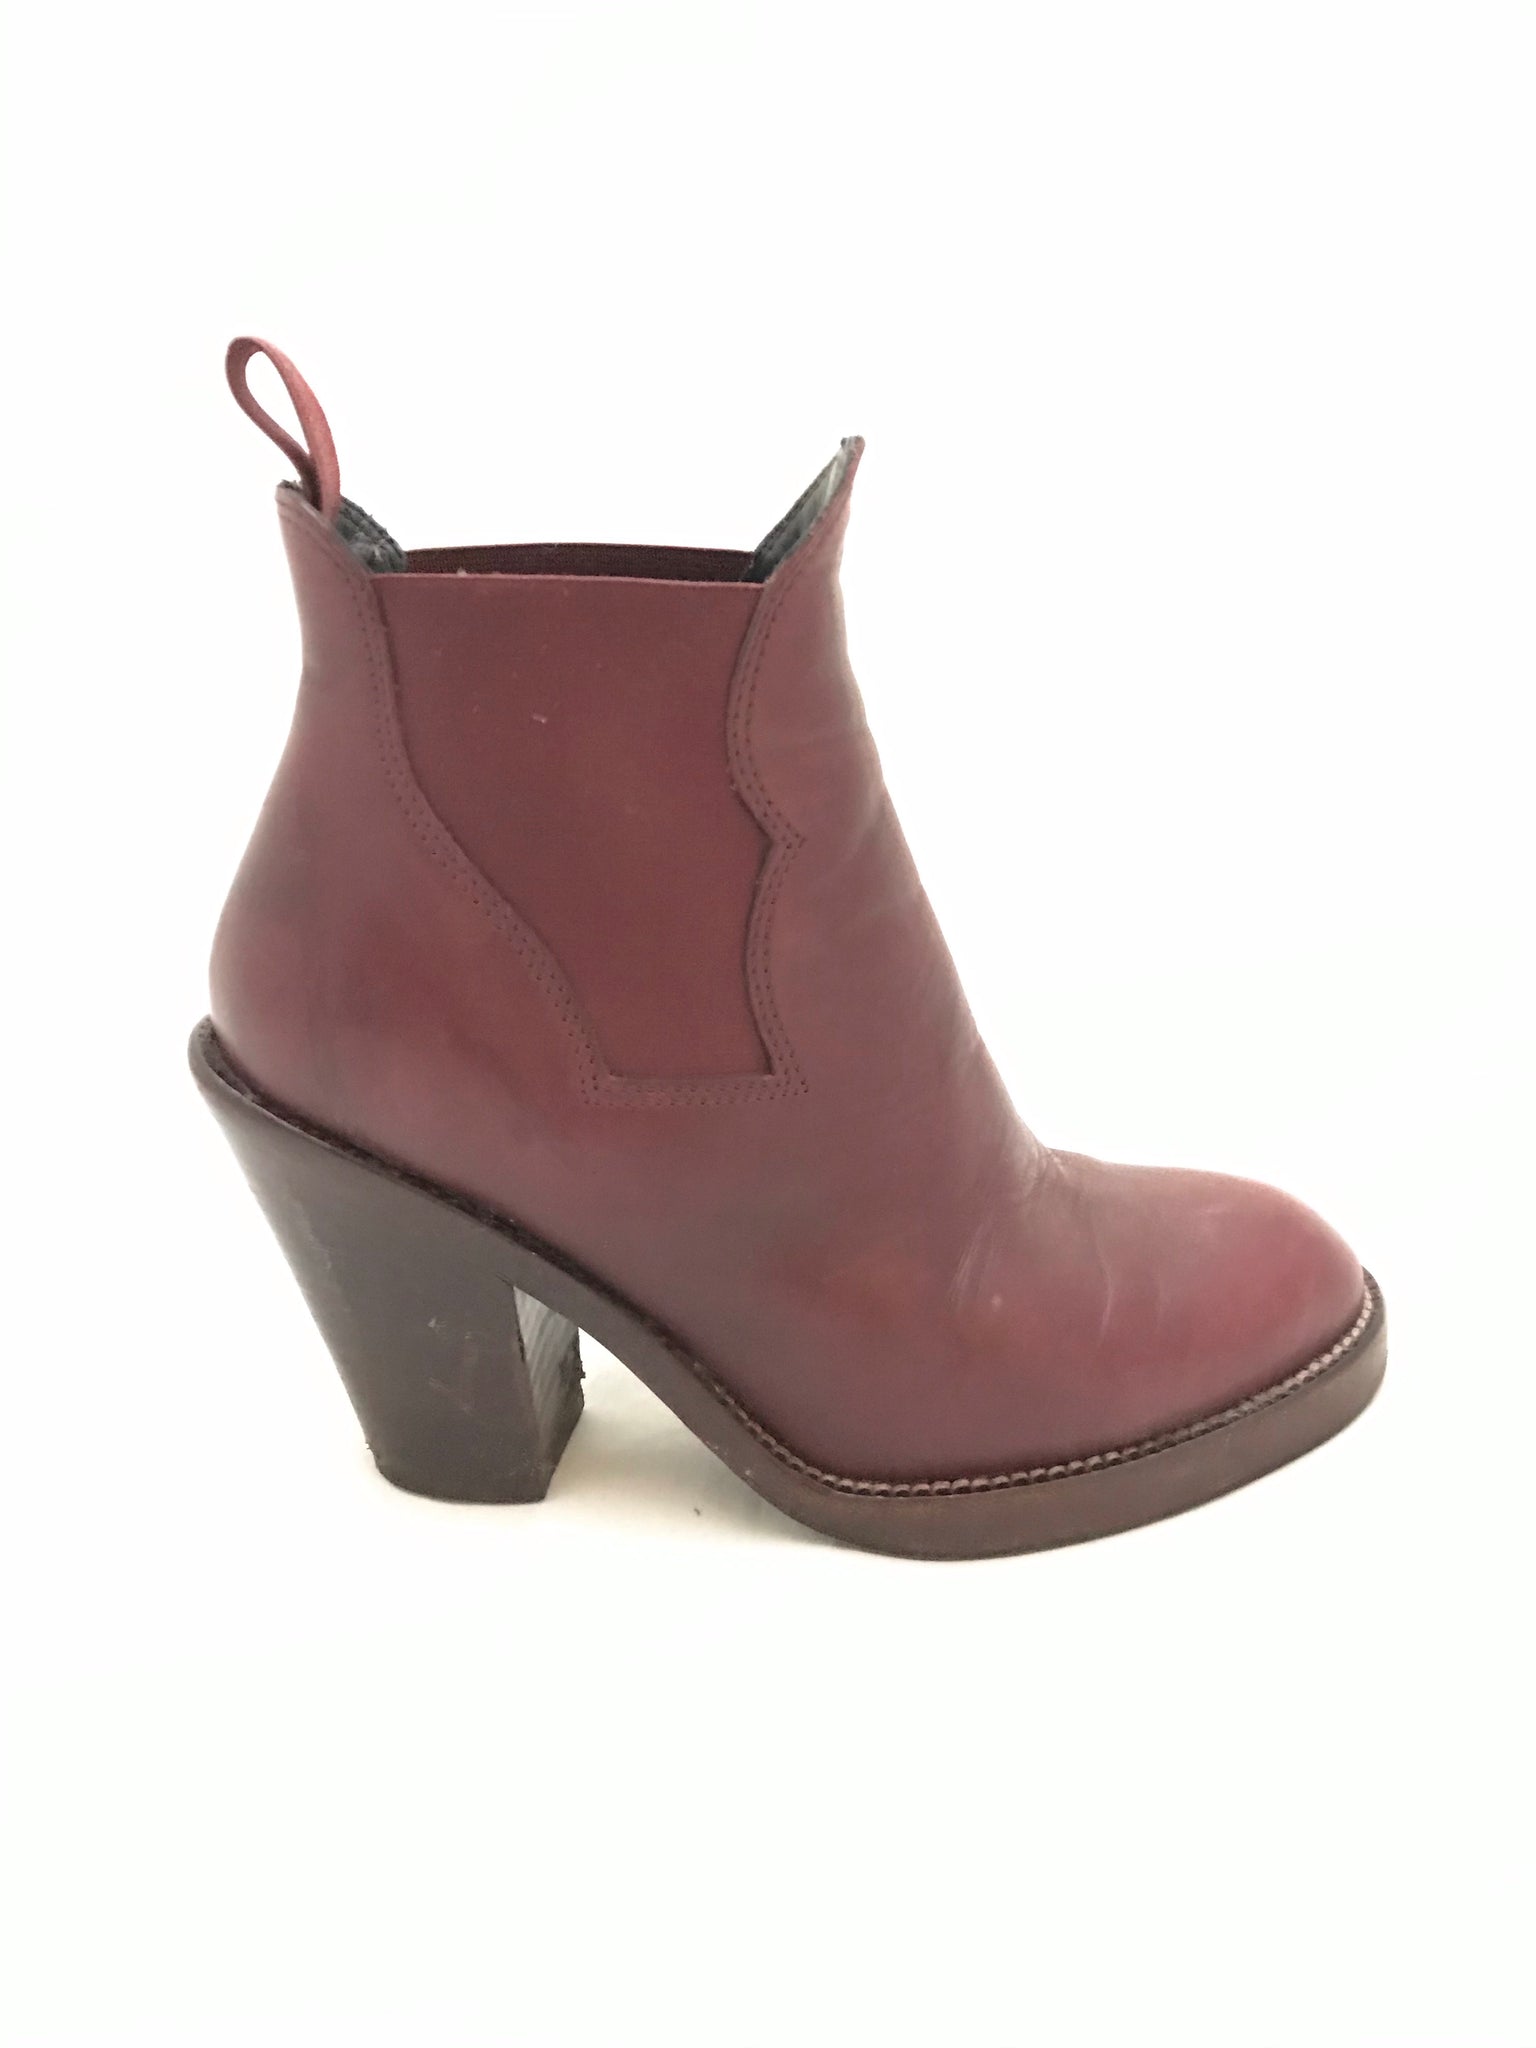 Isabella's Wardrobe Acne Leather Ankle Boots.